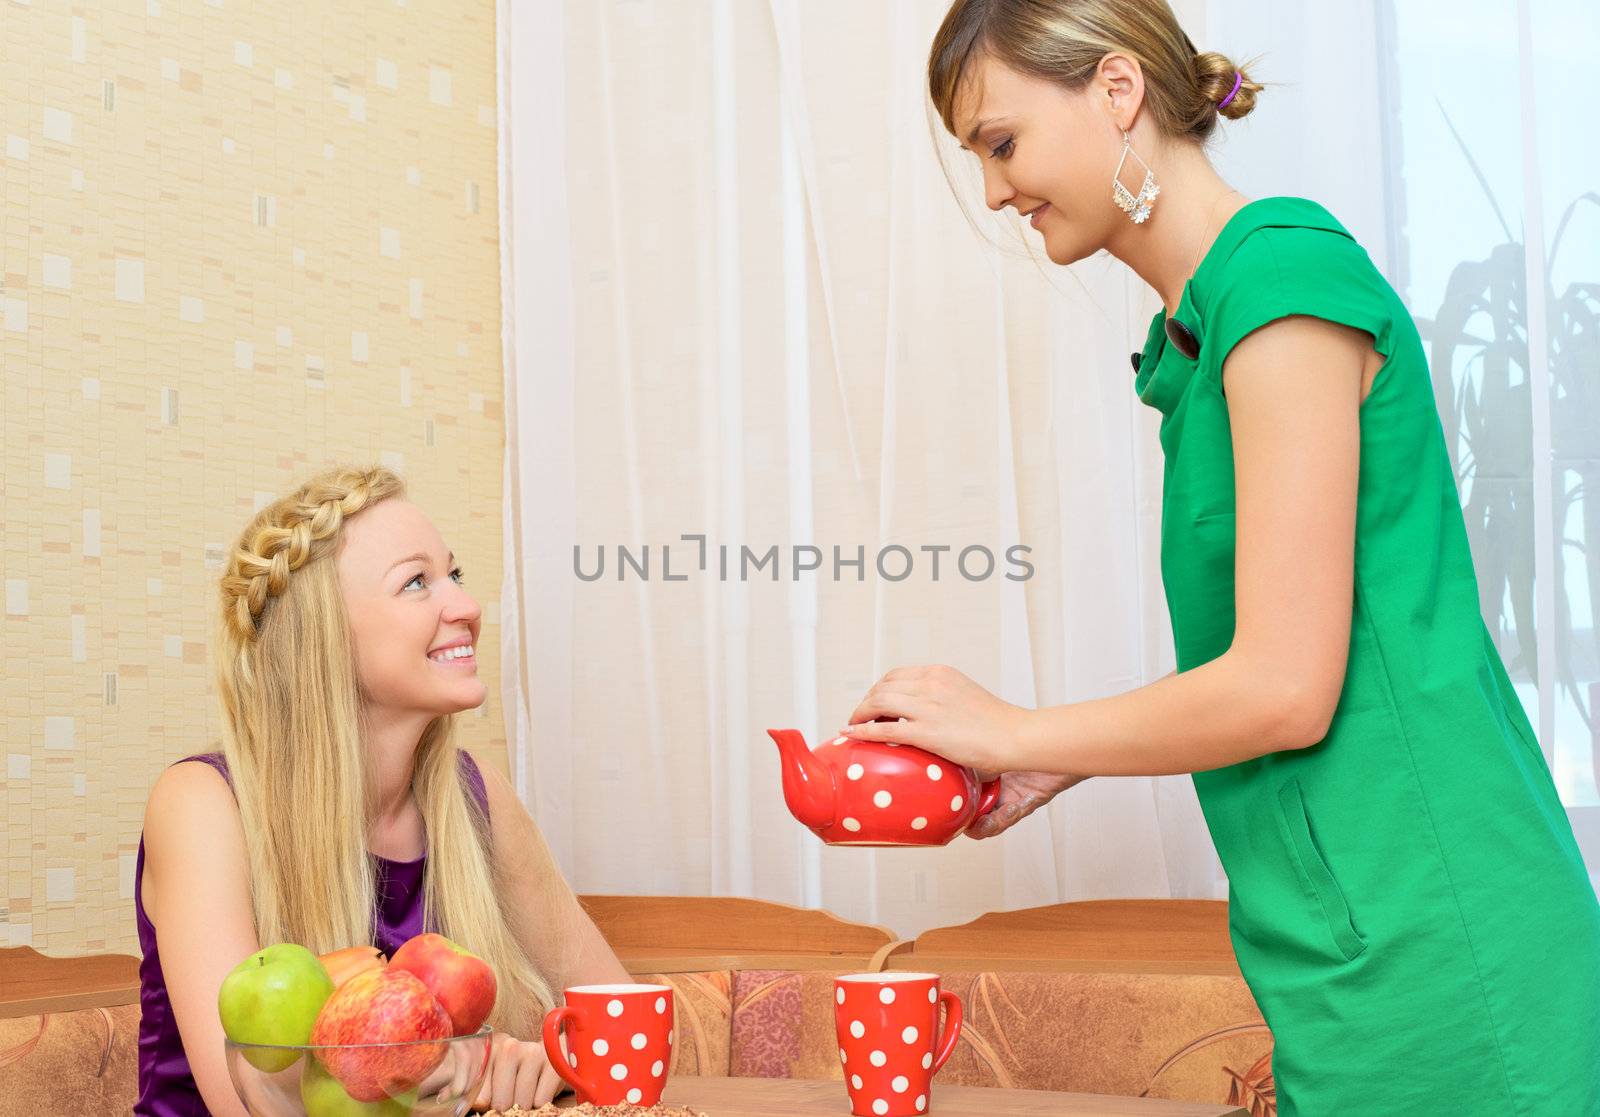 two young woman sitting at a table having tea